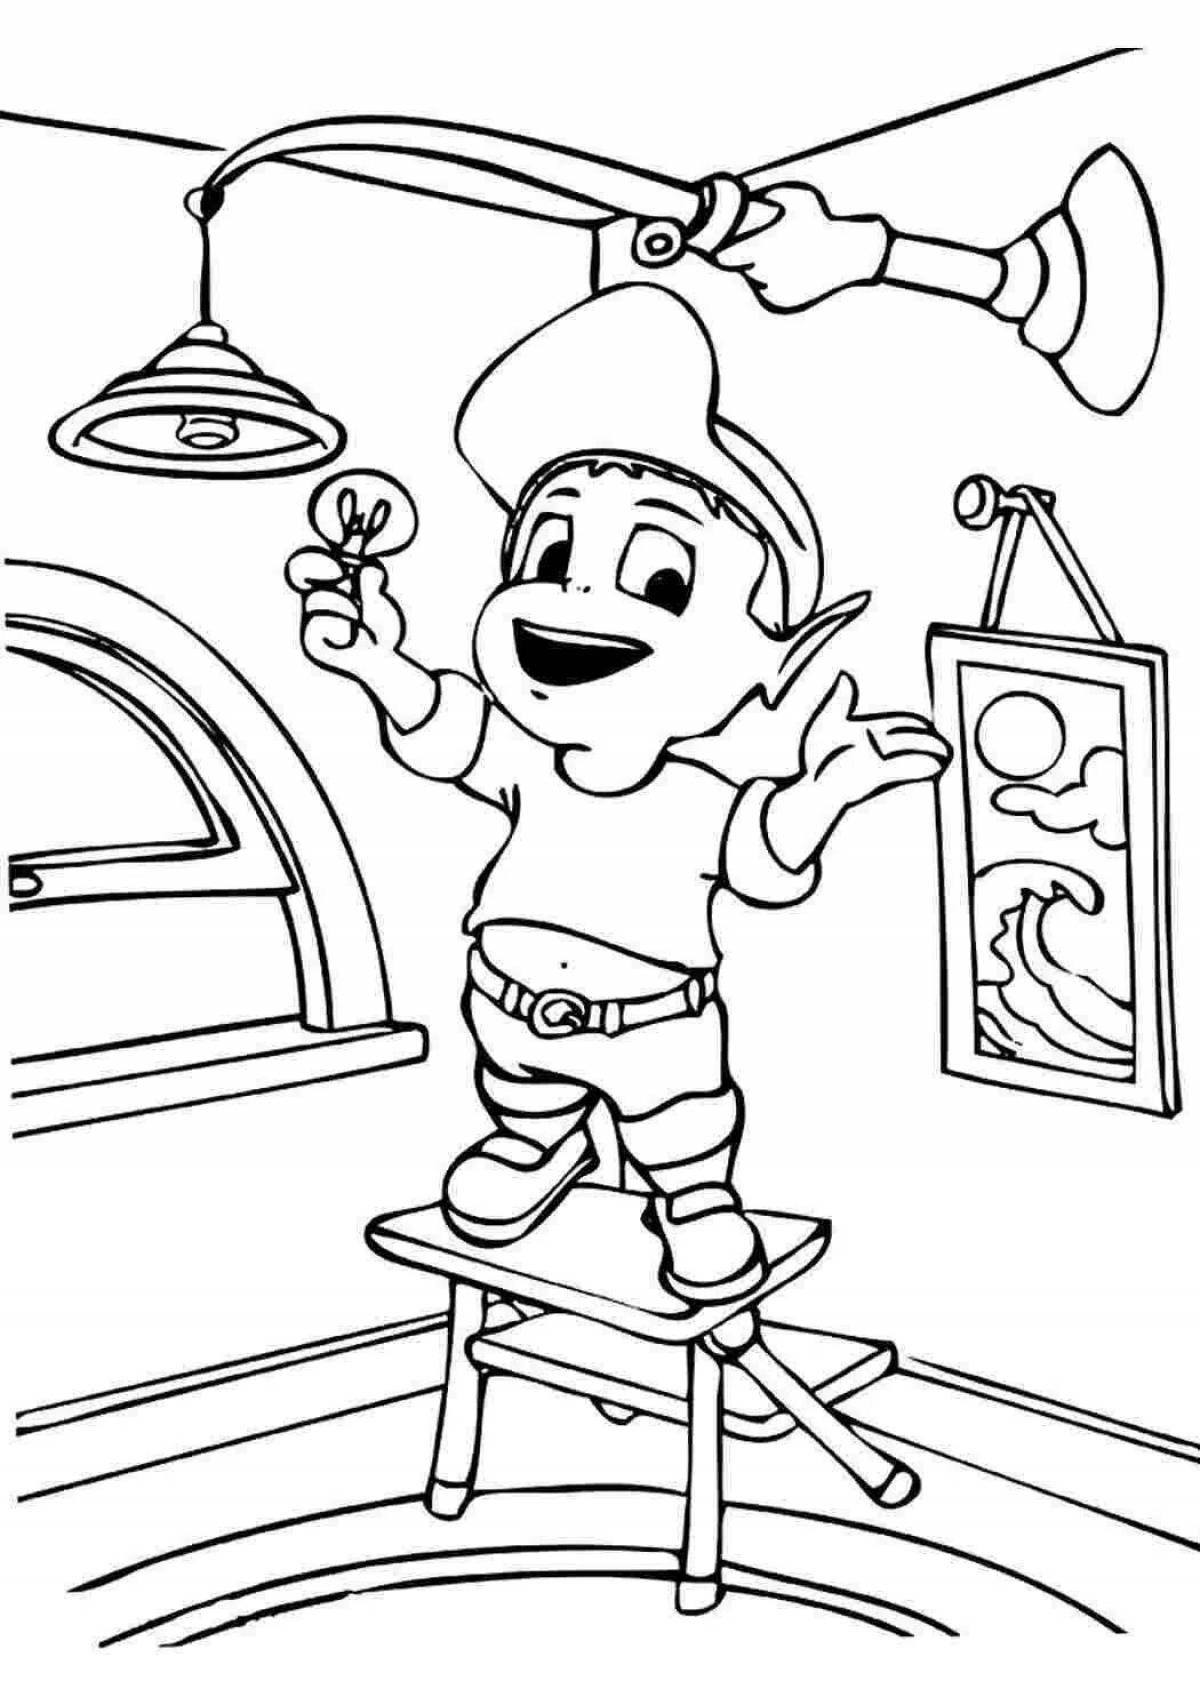 Coloring book for kids safety at home